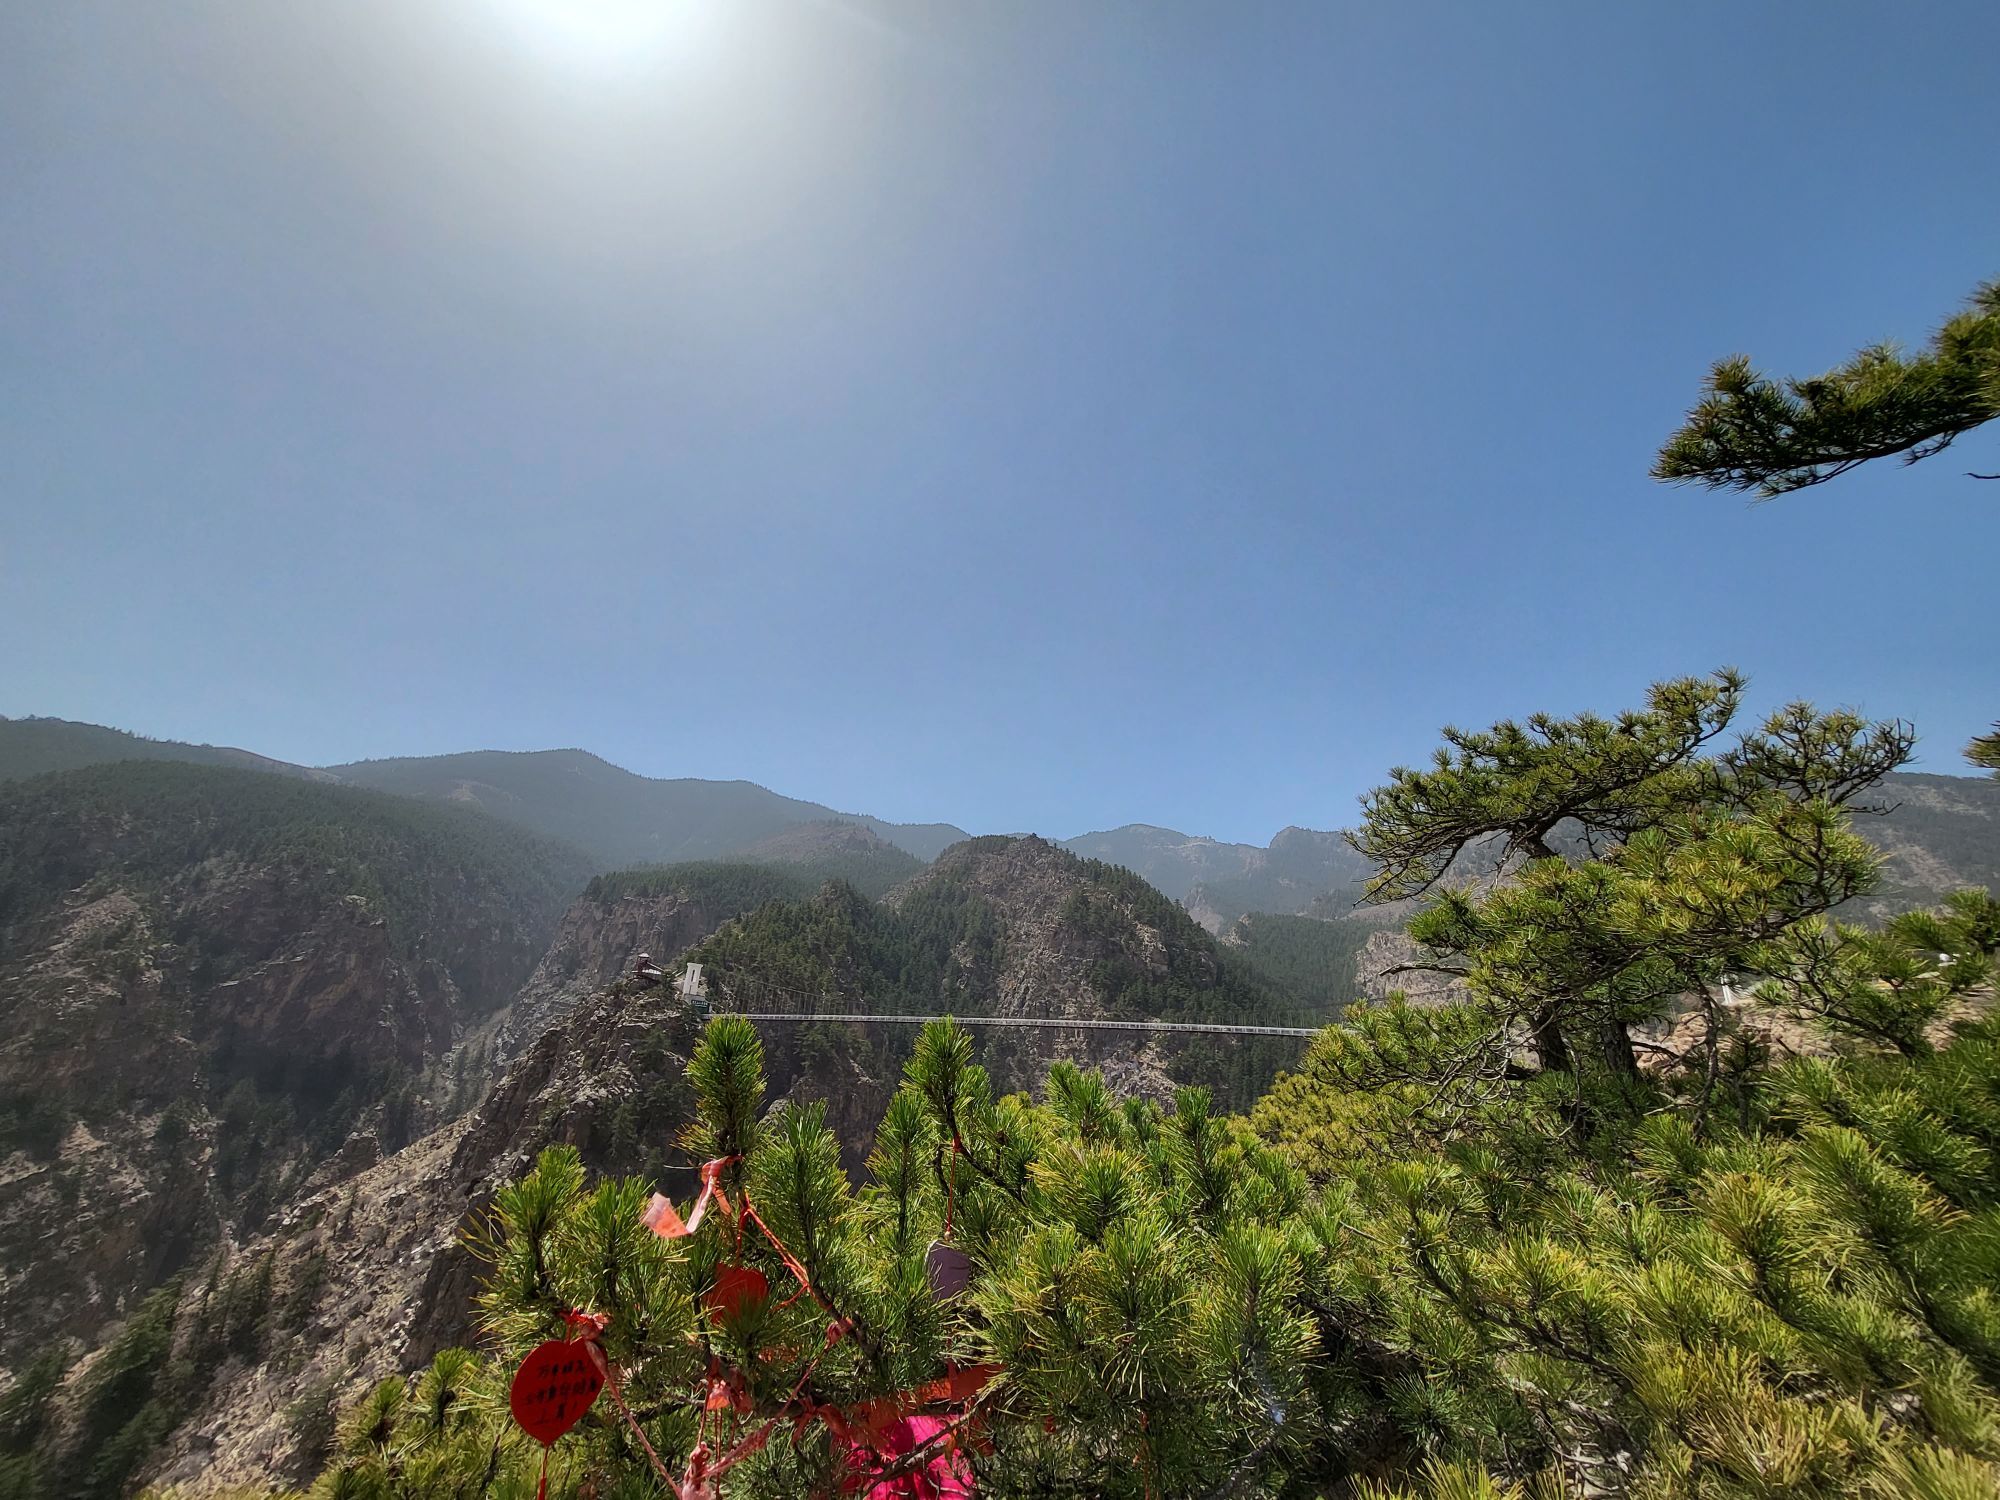 Ningxia Helan Mountain National Forest Park